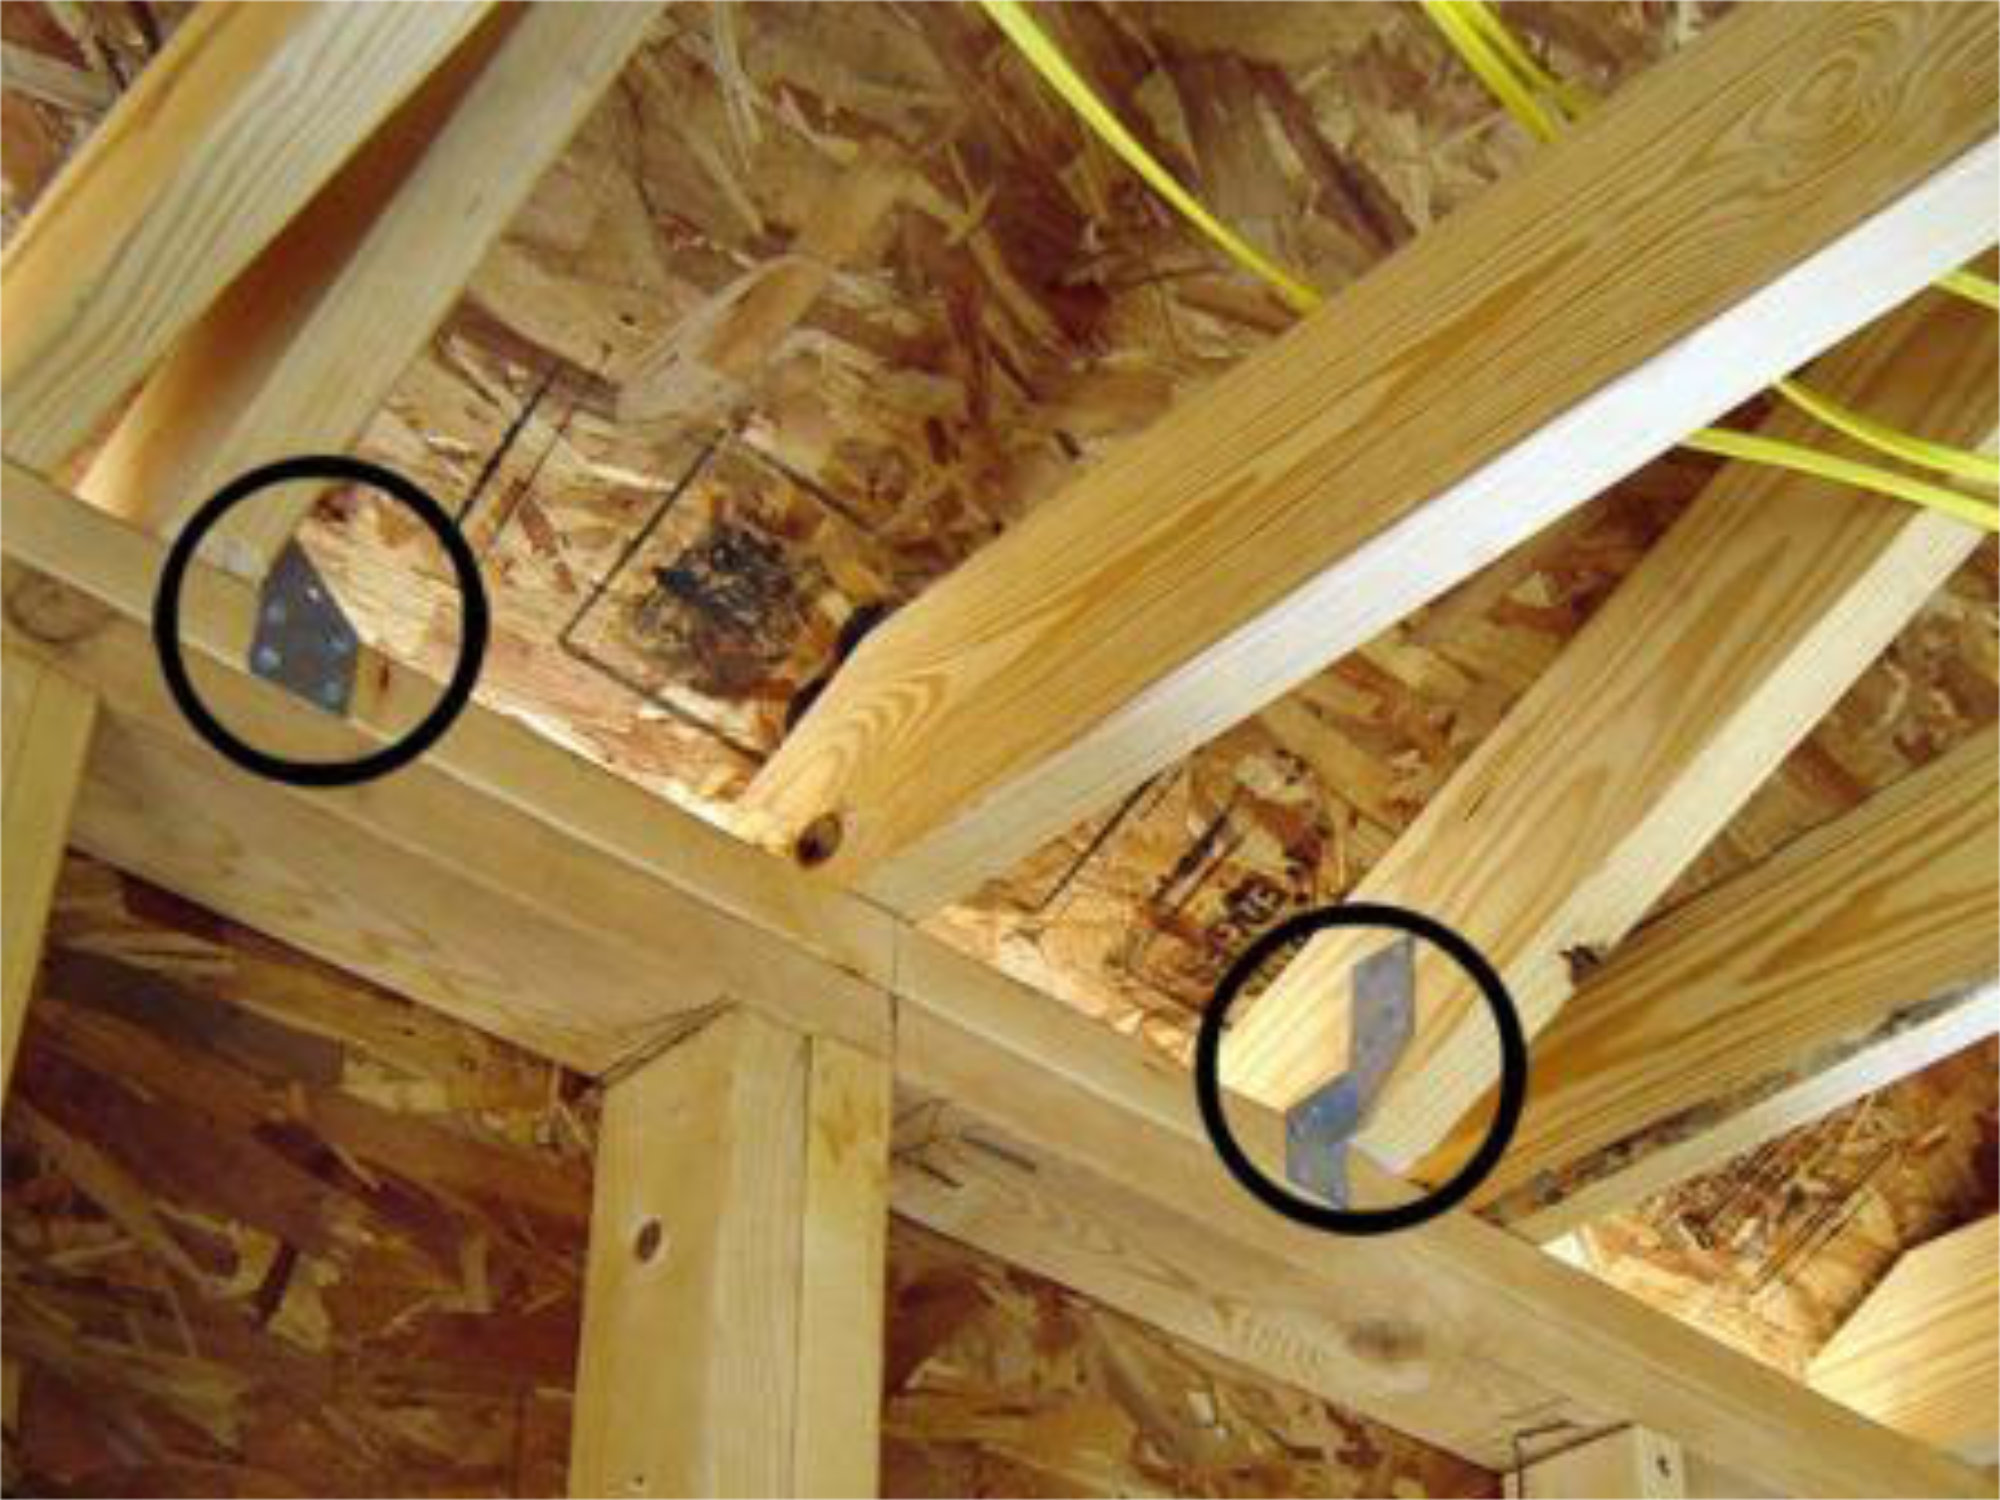 Photo of the interior structure of a roof, with wood joists held together with hurricane clips.